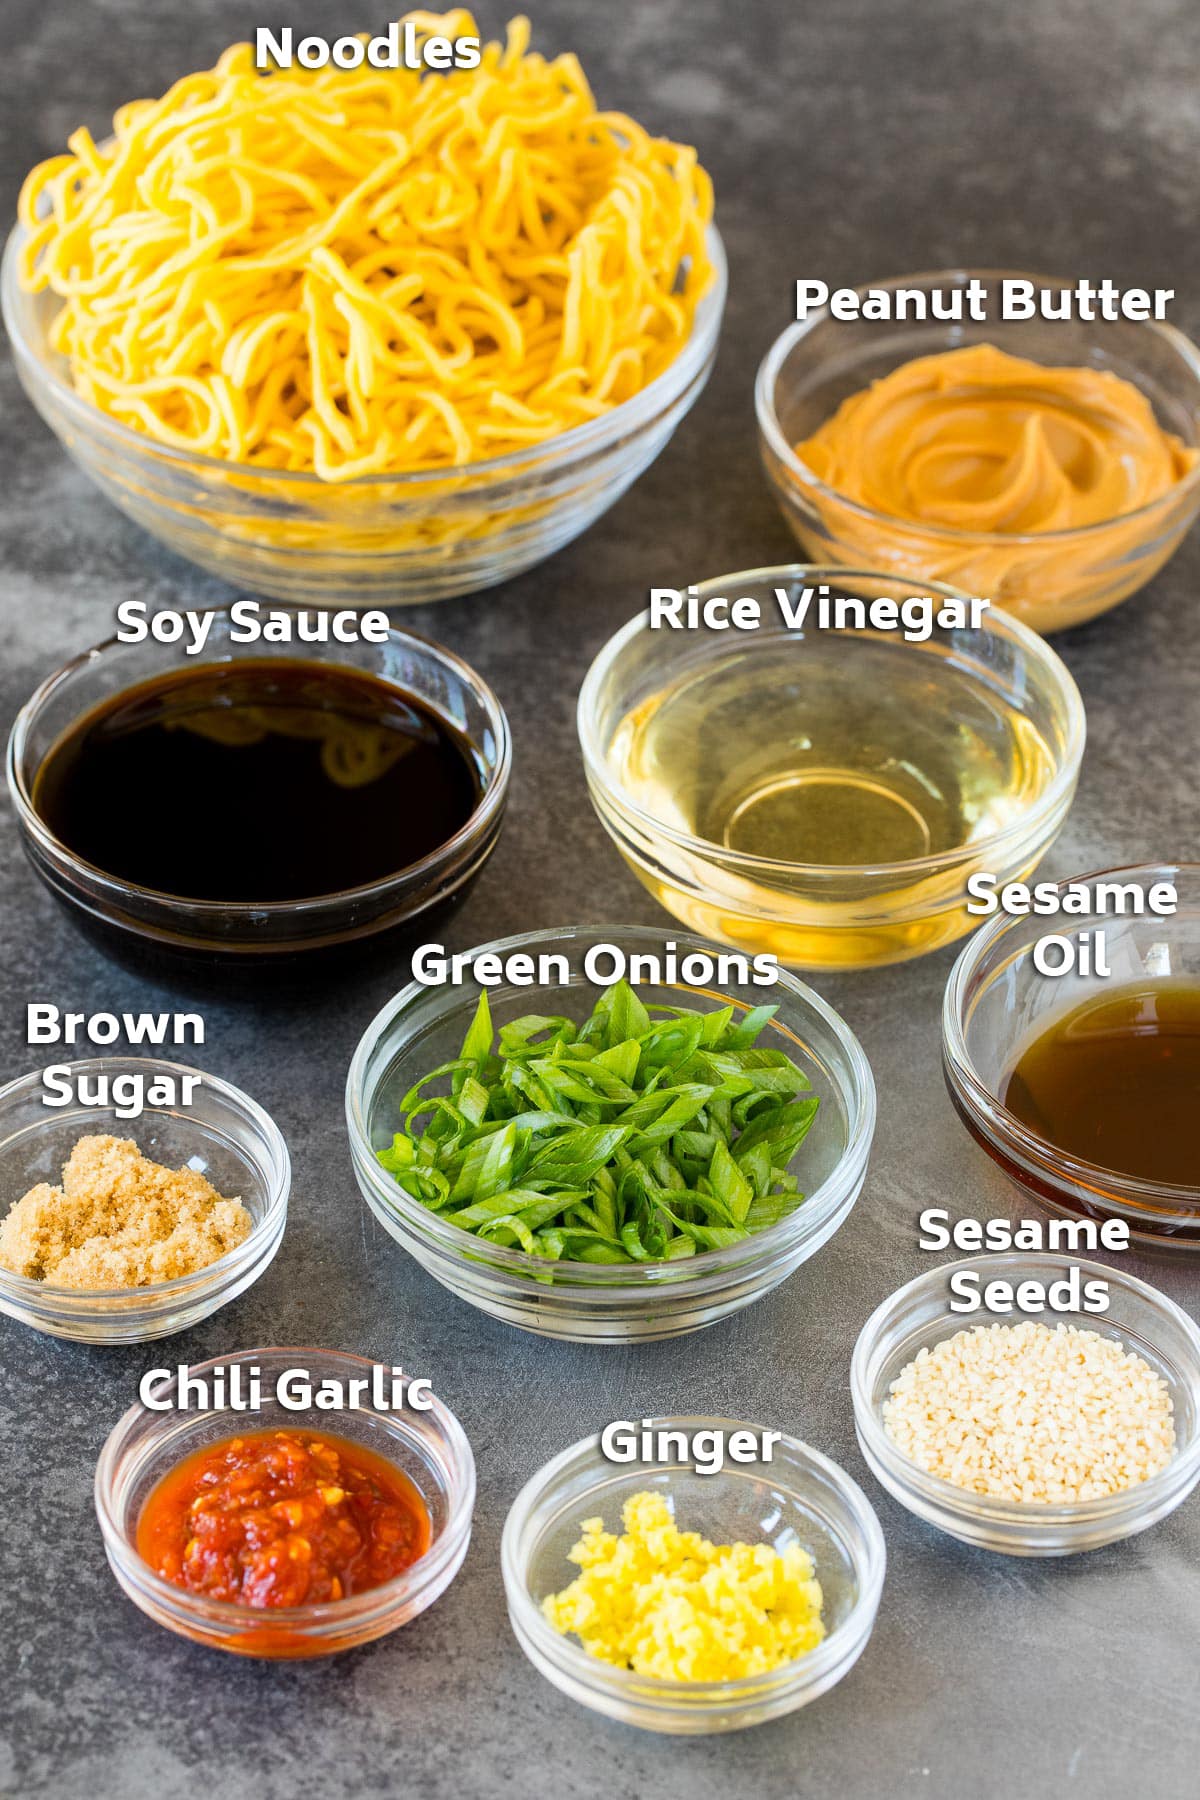 Bowls of ingredients including noodles, herbs, sesame oil, soy sauce and ginger.